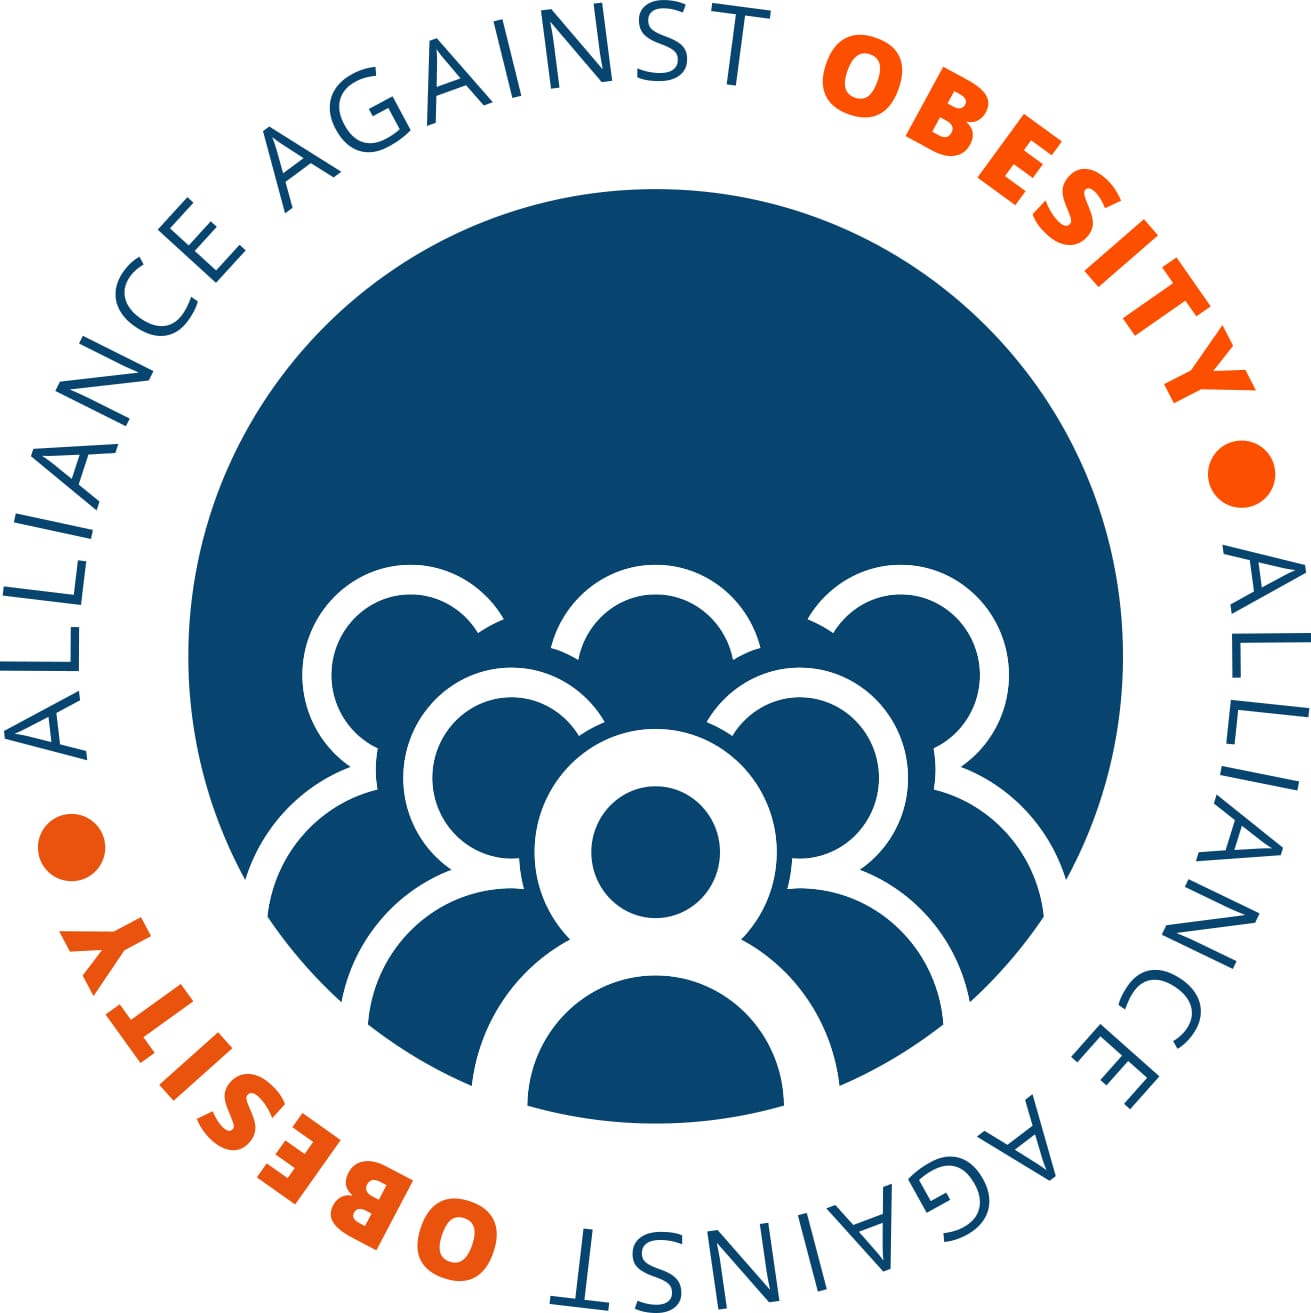 Logo of the alliance against obesity, featuring a stylized group of people in a circle, with the organization’s name around the edge in blue and orange colors.